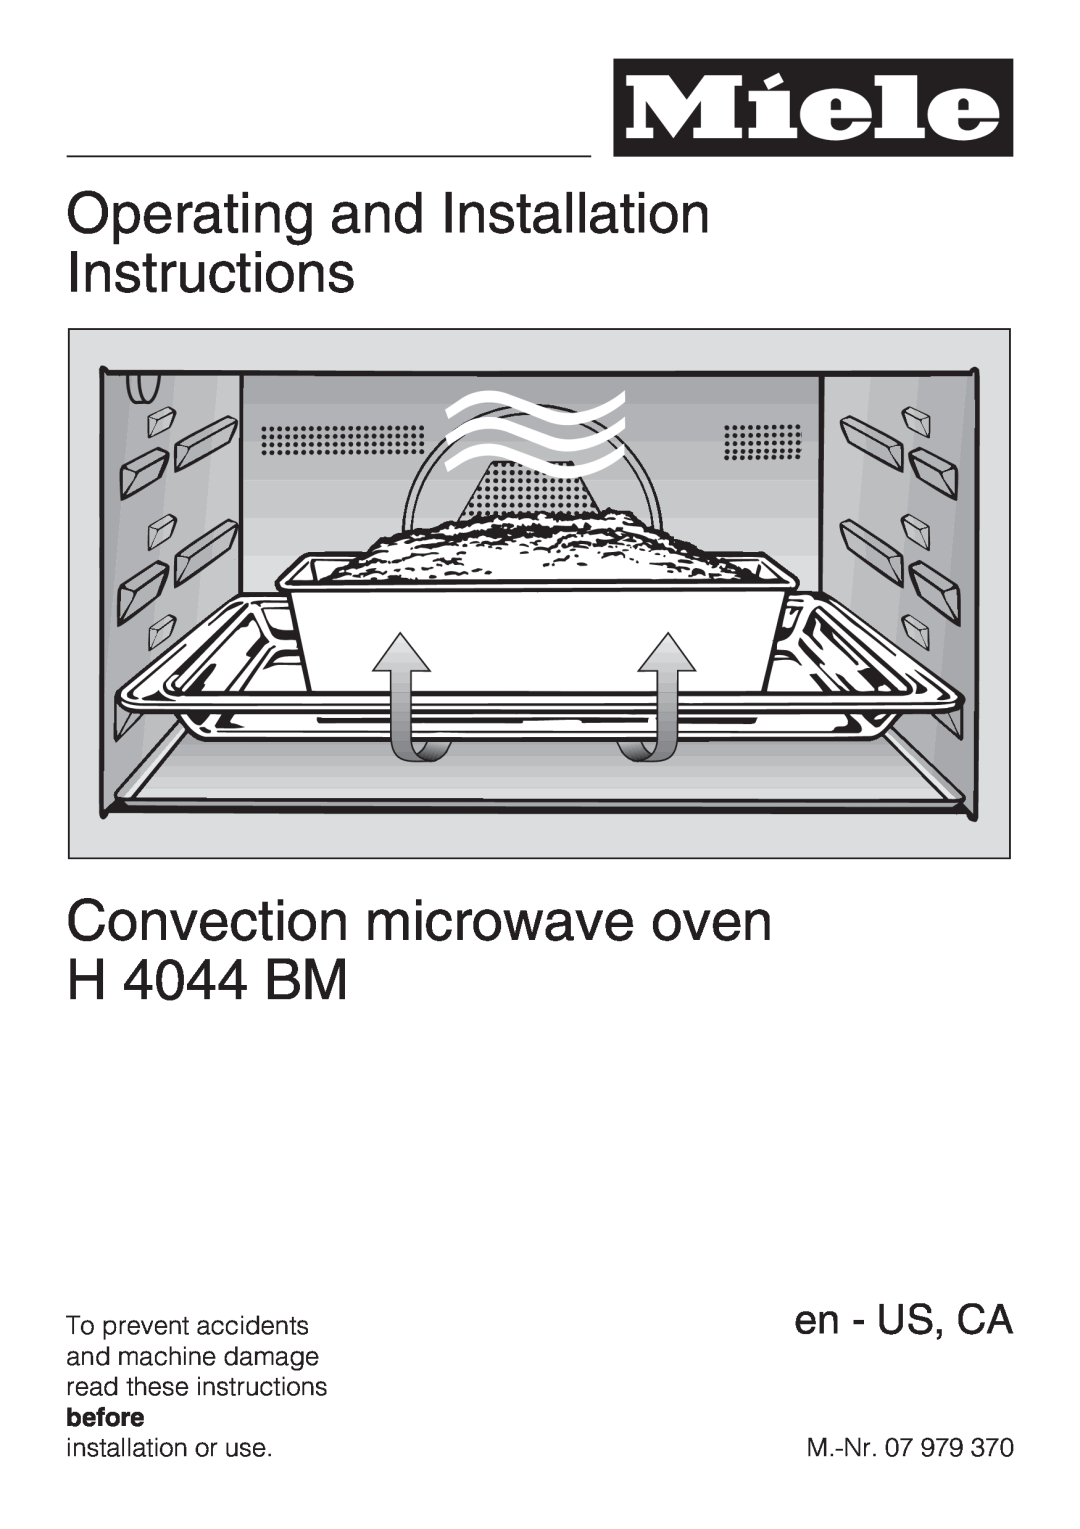 Miele installation instructions Operating and Installation, Instructions, Convection microwave oven H 4044 BM 